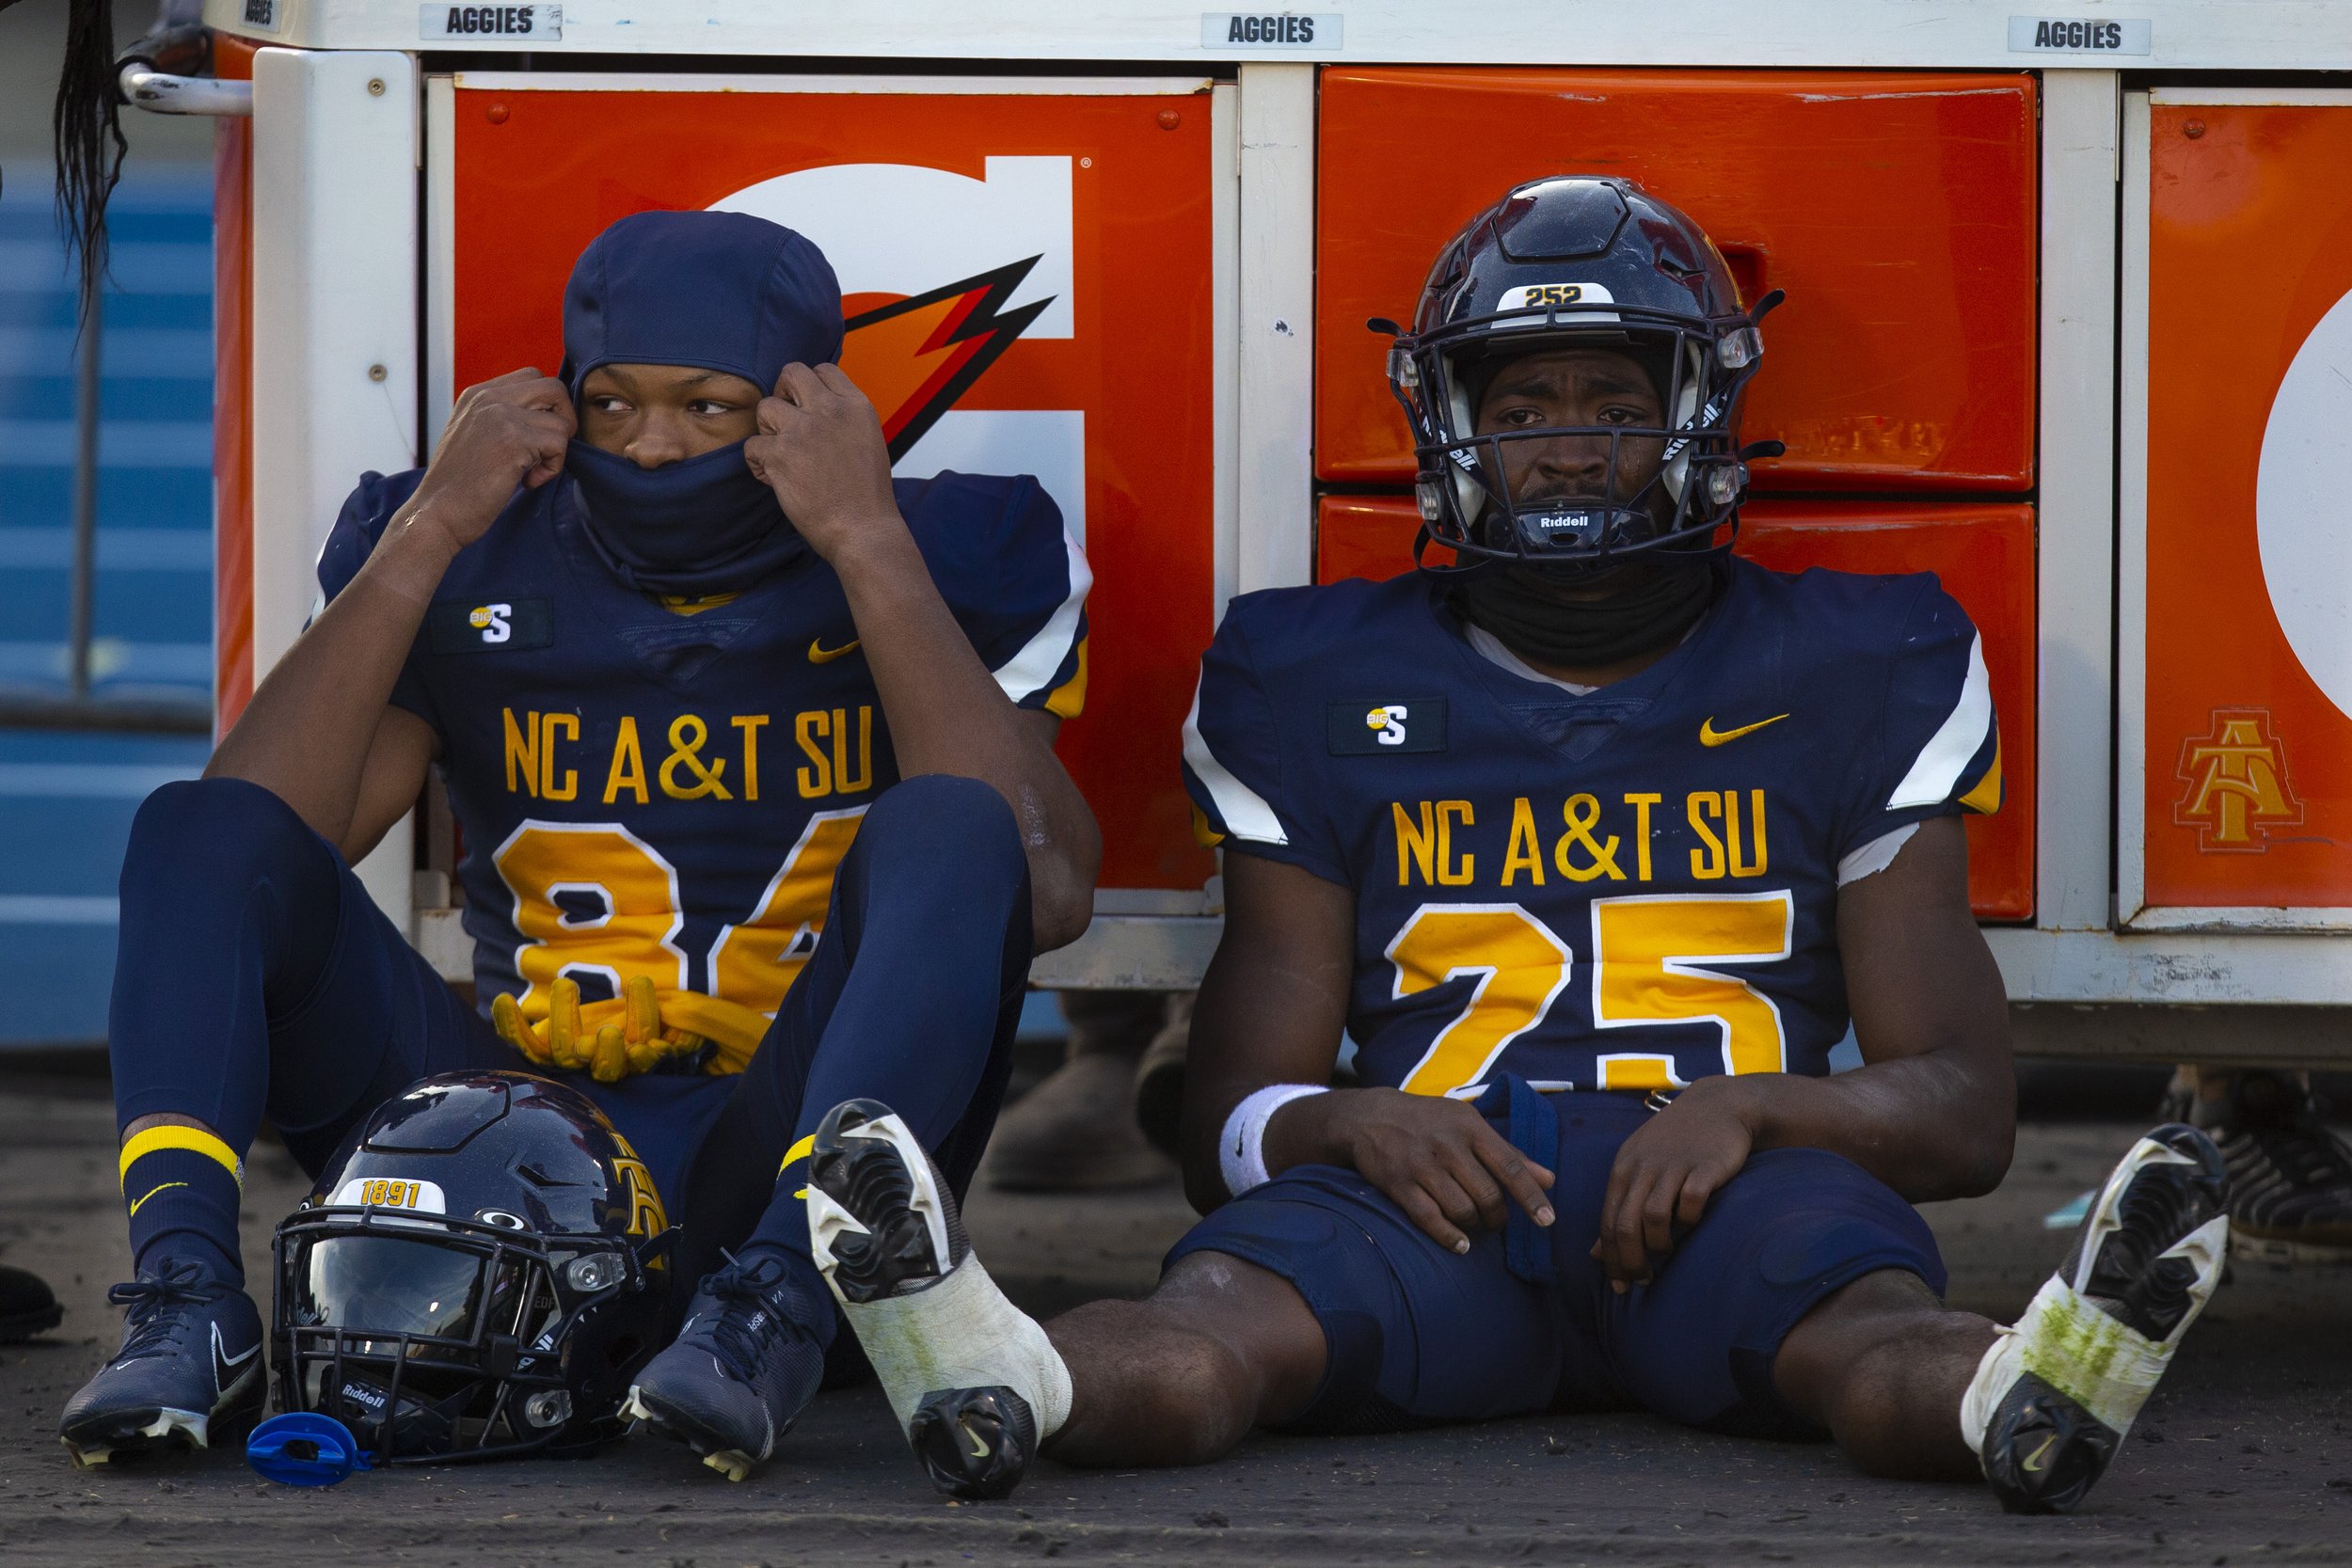  A&amp;T's Jamison Warren (left) sits besides his teammate Kashon Baker as he becomes emotional after A&amp;T lost to Gardner-Webb  at BB&amp;T Stadium in Greensboro, N.C., on Saturday,  November 20, 2021.   